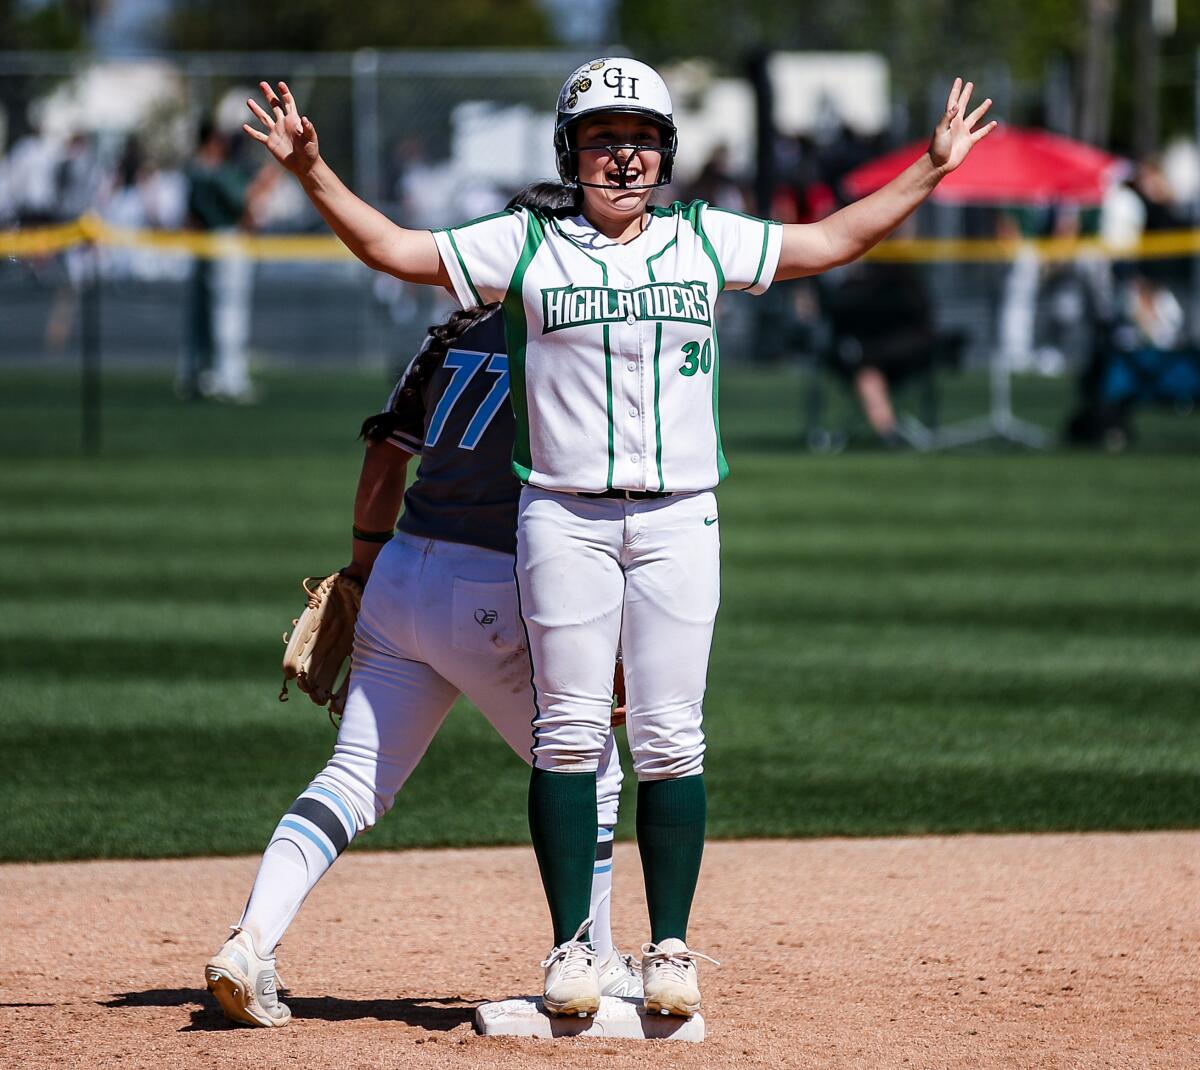 Jeannette Camarena of Granada Hills celebrates while standing on second base during a win over El Camino Real.